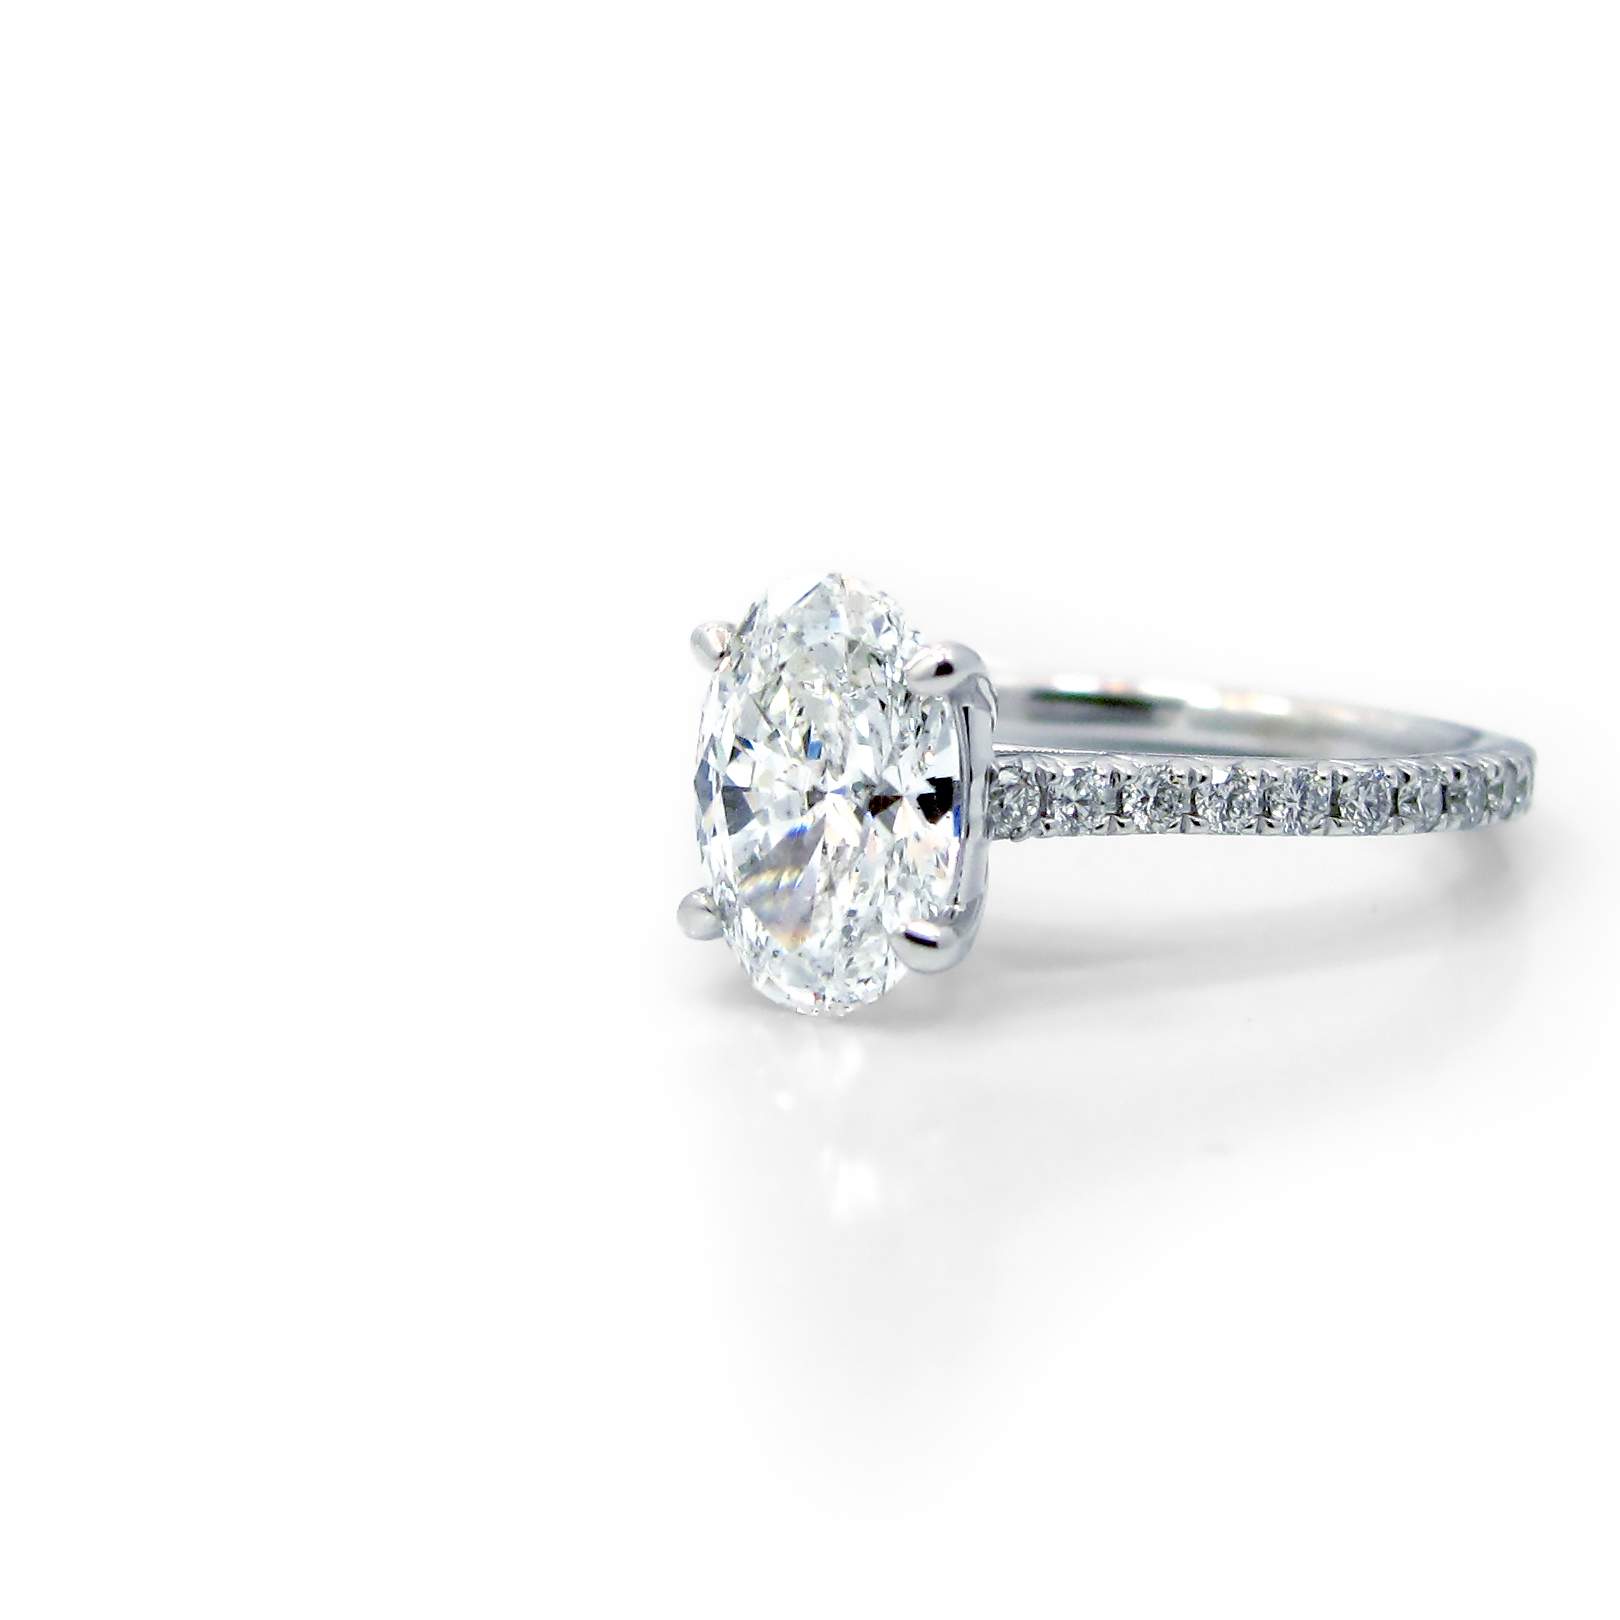 This is a picture of a Split Prong Open Basket Diamond Band Engagement Setting